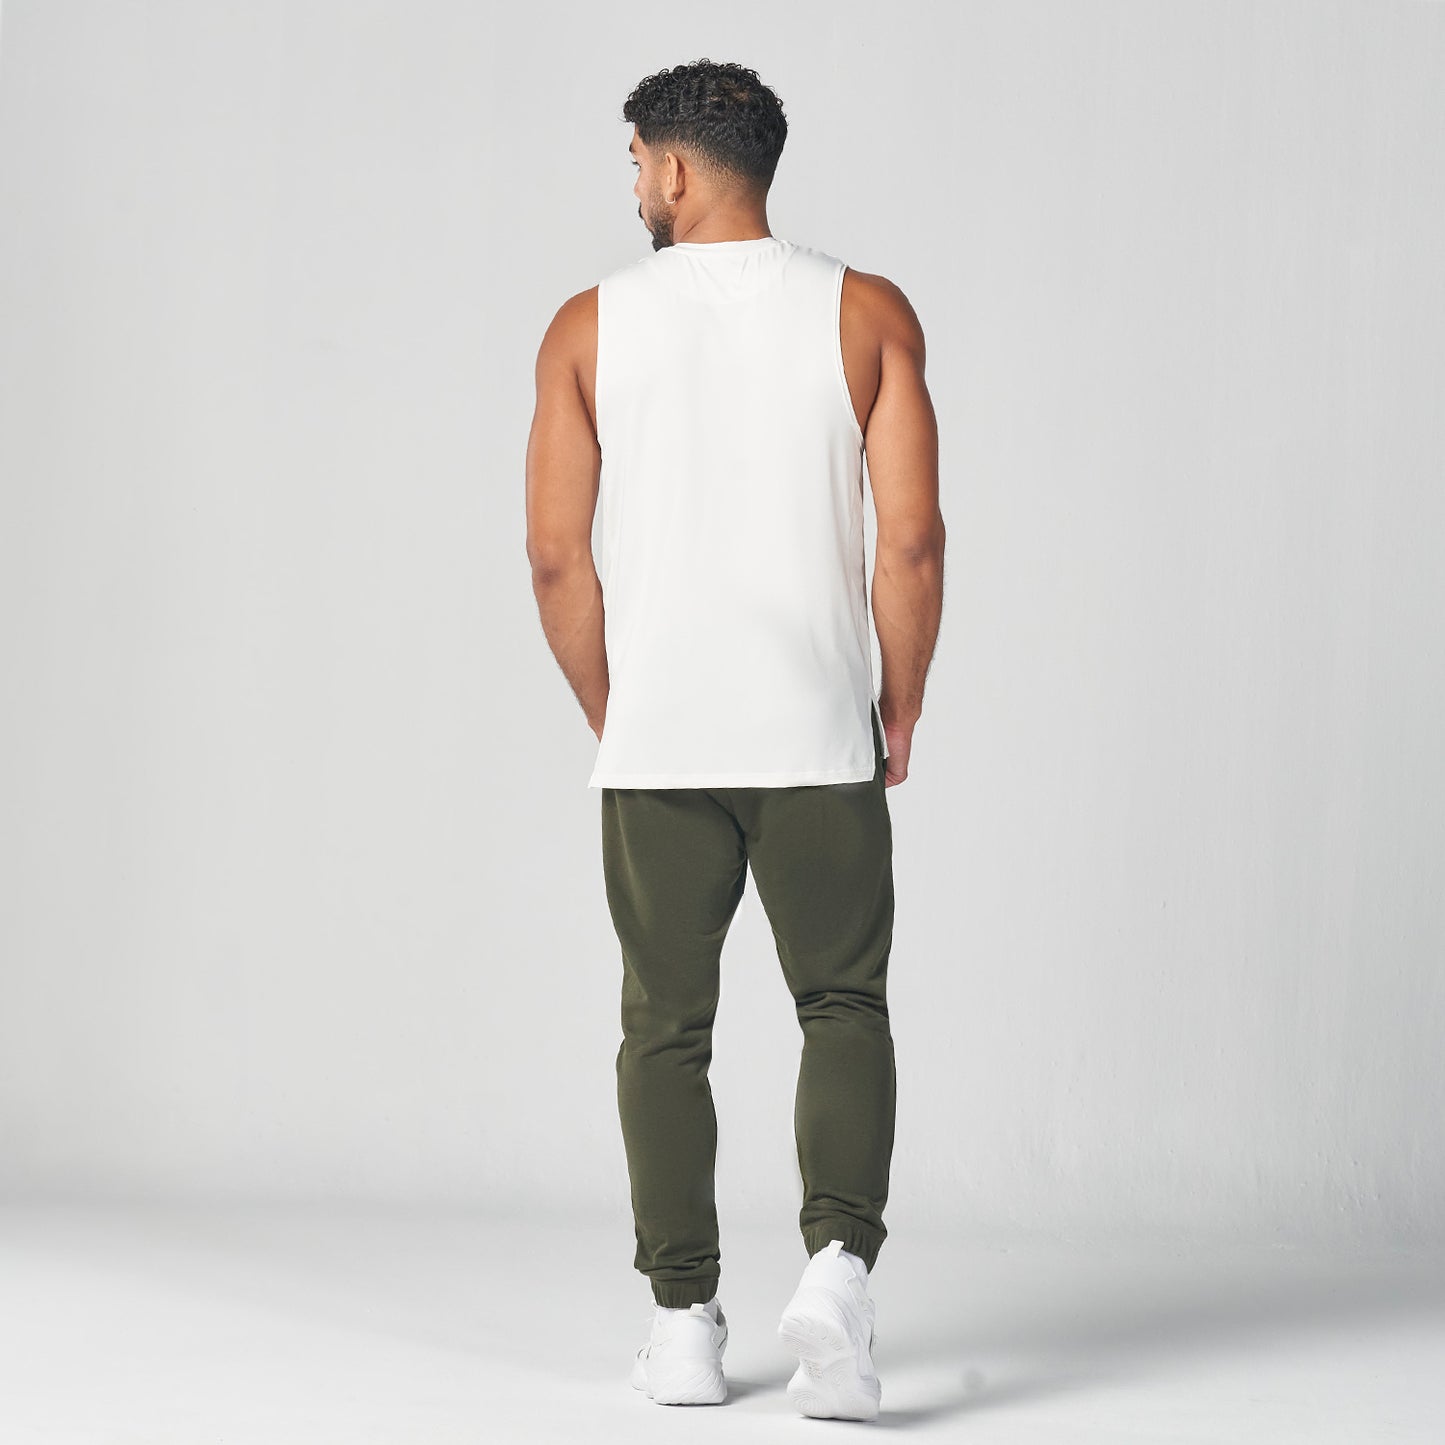 squatwolf-gym-wear-essential-gym-tank-pearl-white-workout-tank-tops-for-men